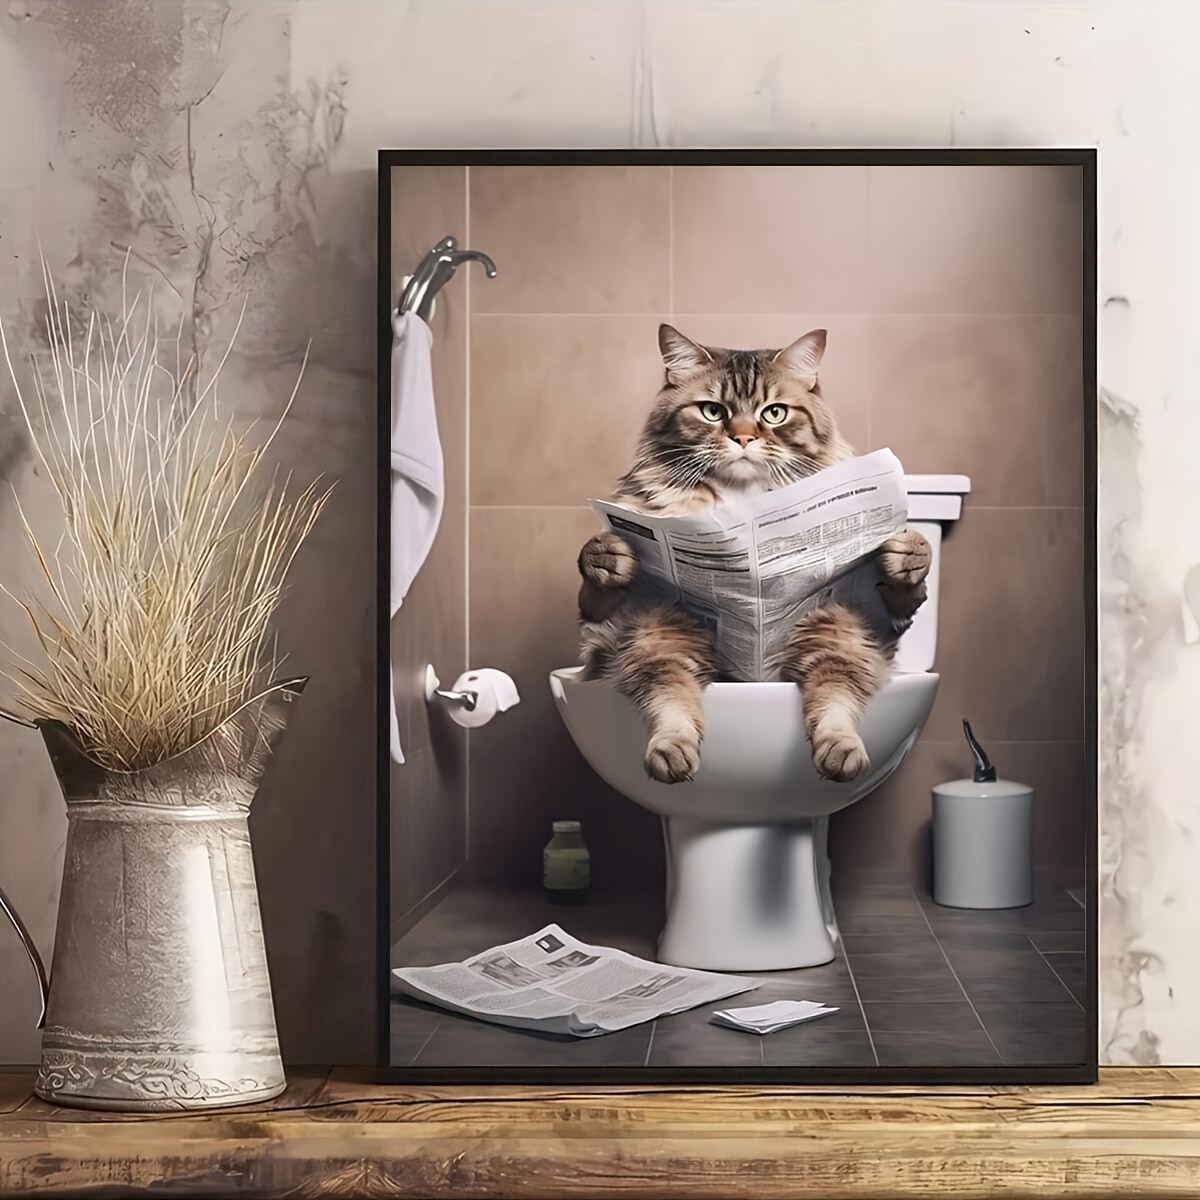 

1pc Frameless Vintage Cat Print Canvas Poster, Cat In Toilet, Animal In Toilet, Cat Reading Newspaper, Animal Art, Bathroom Wall Art, Funny Bathroom Decor, Wc, Toilet Deco